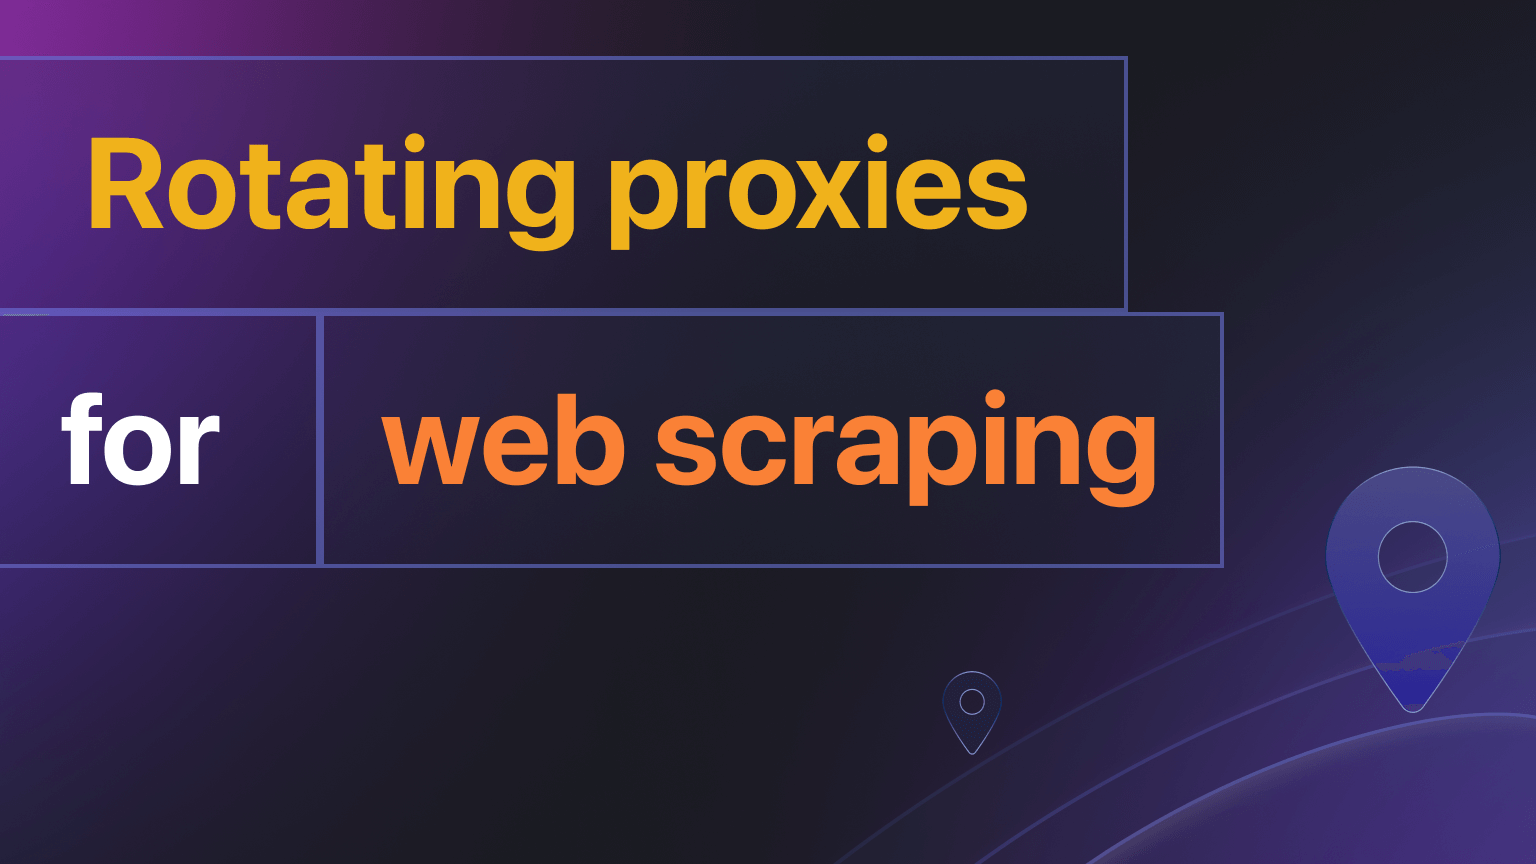 Rotating proxies for web scraping